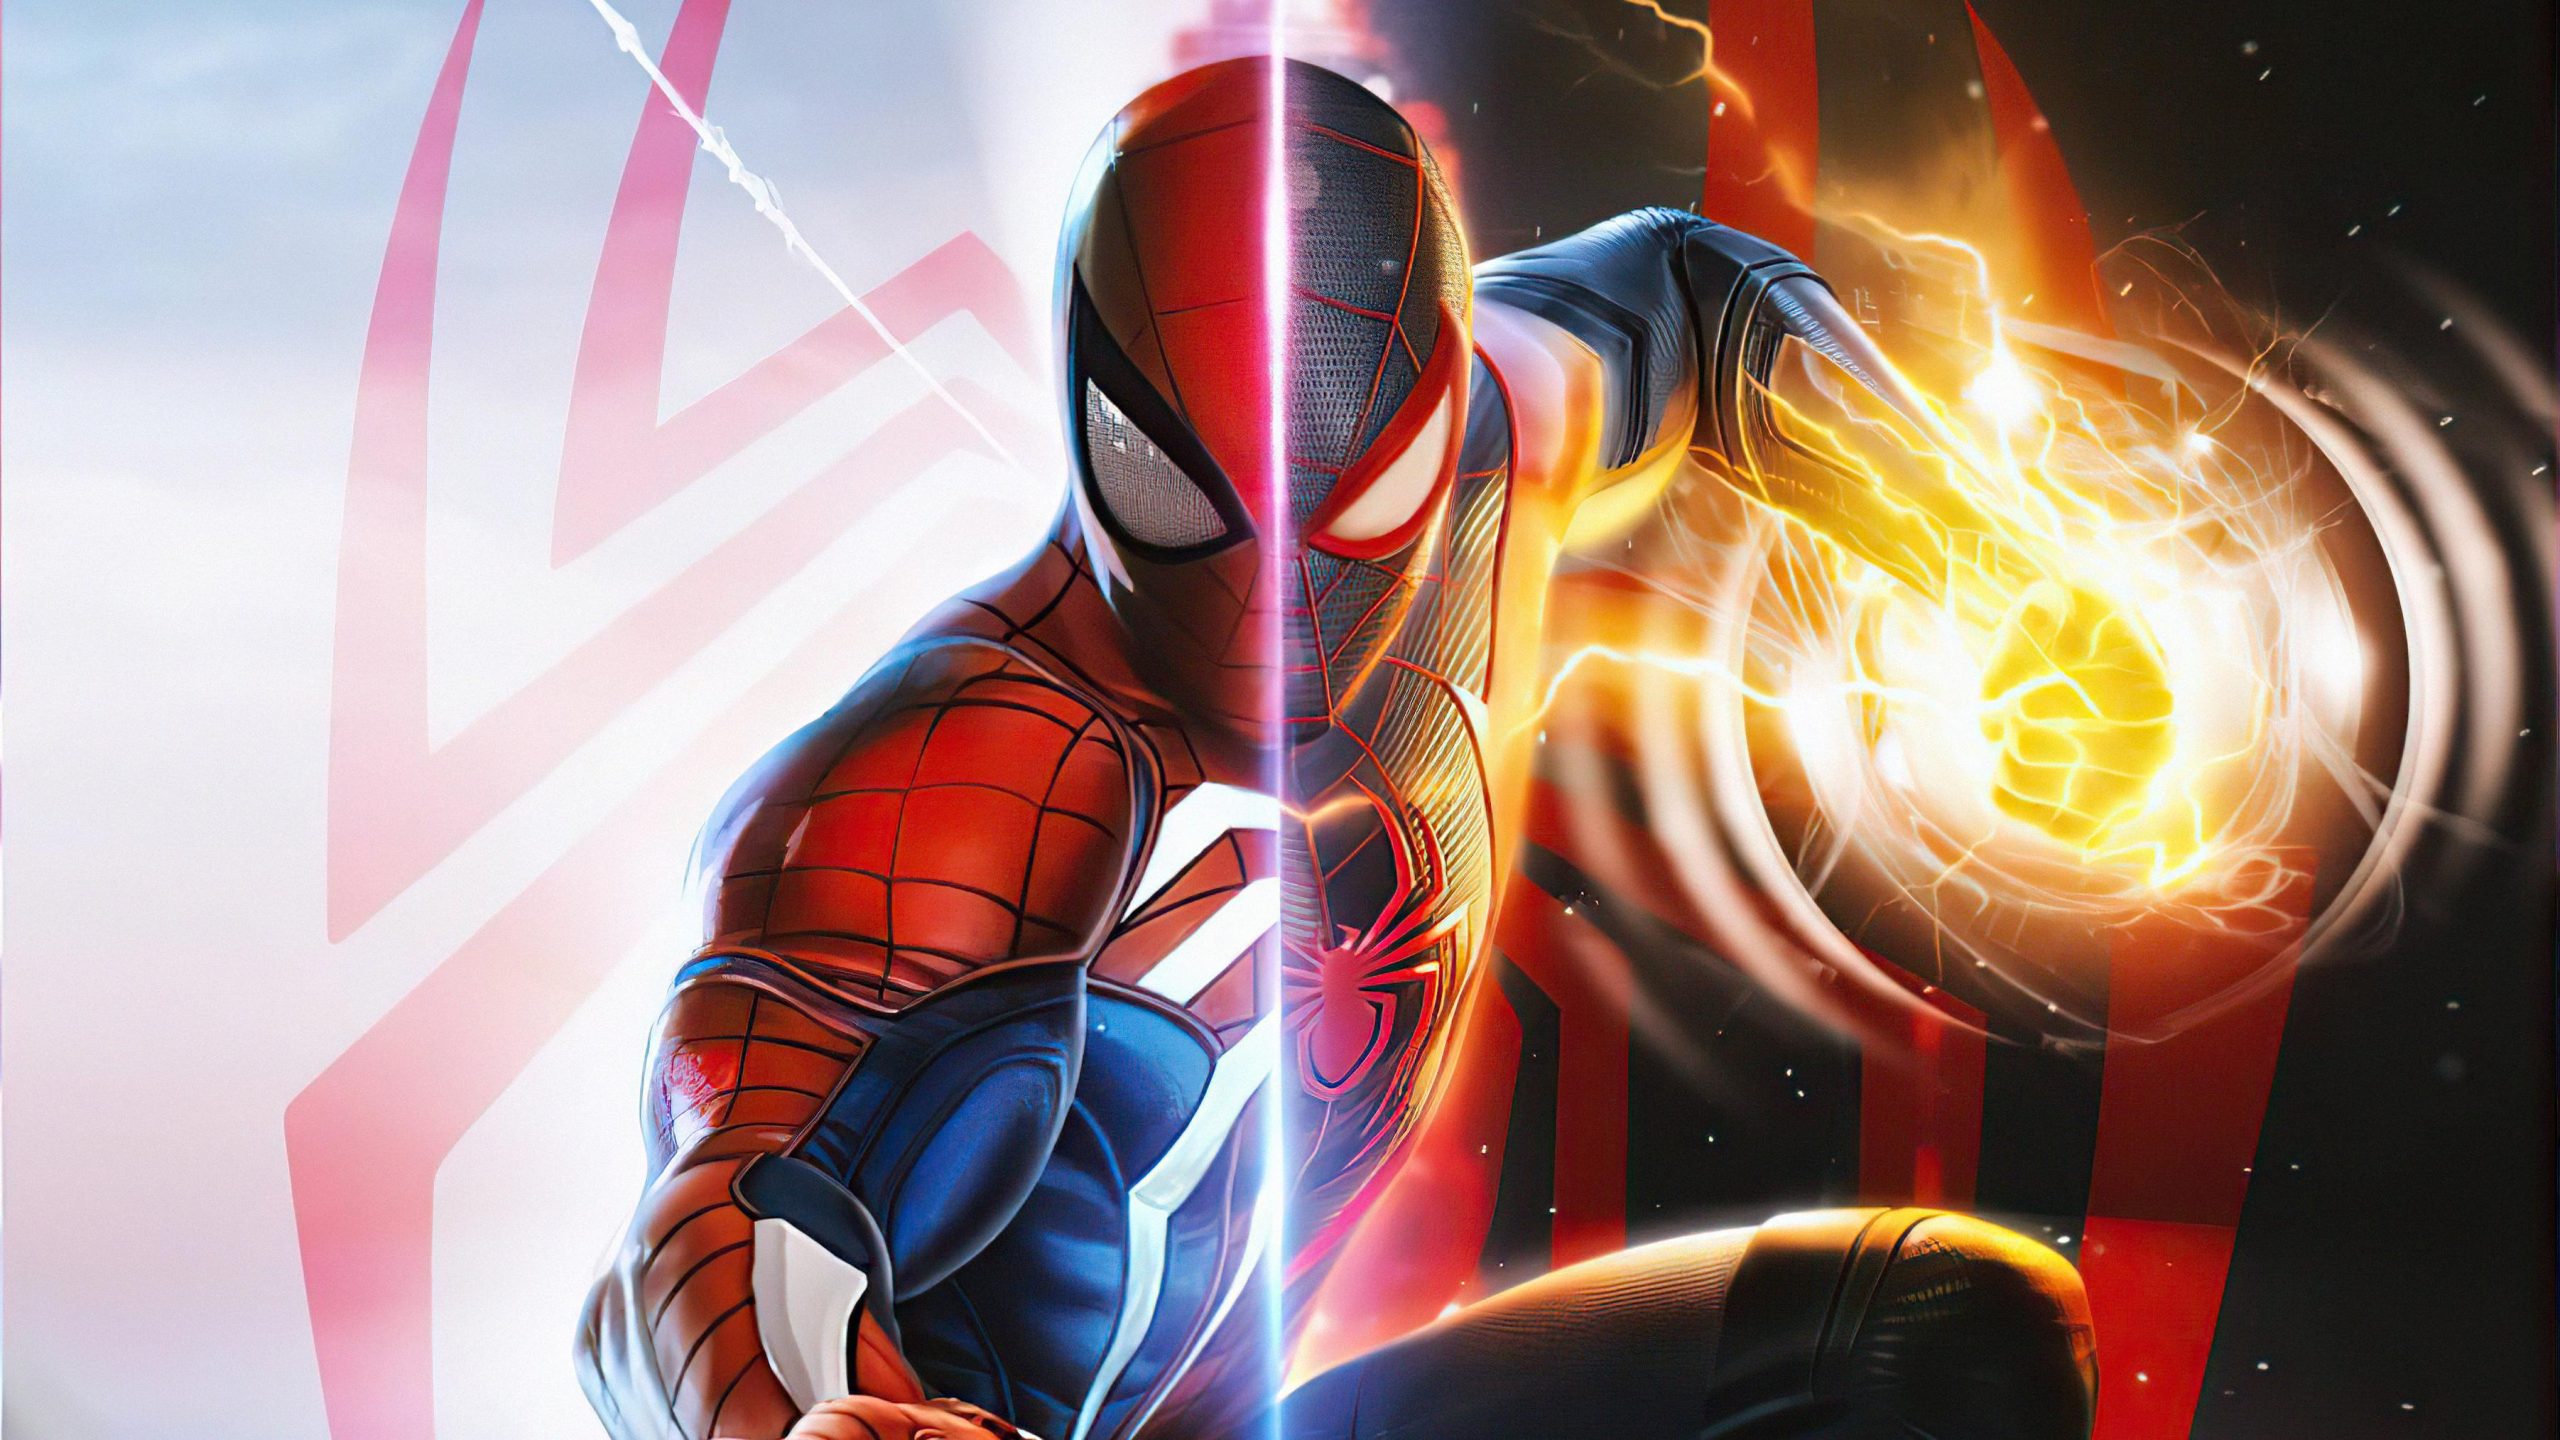 Spider-Man And Miles Morales Wallpaper, Spider-Man And Miles Morales, Movies